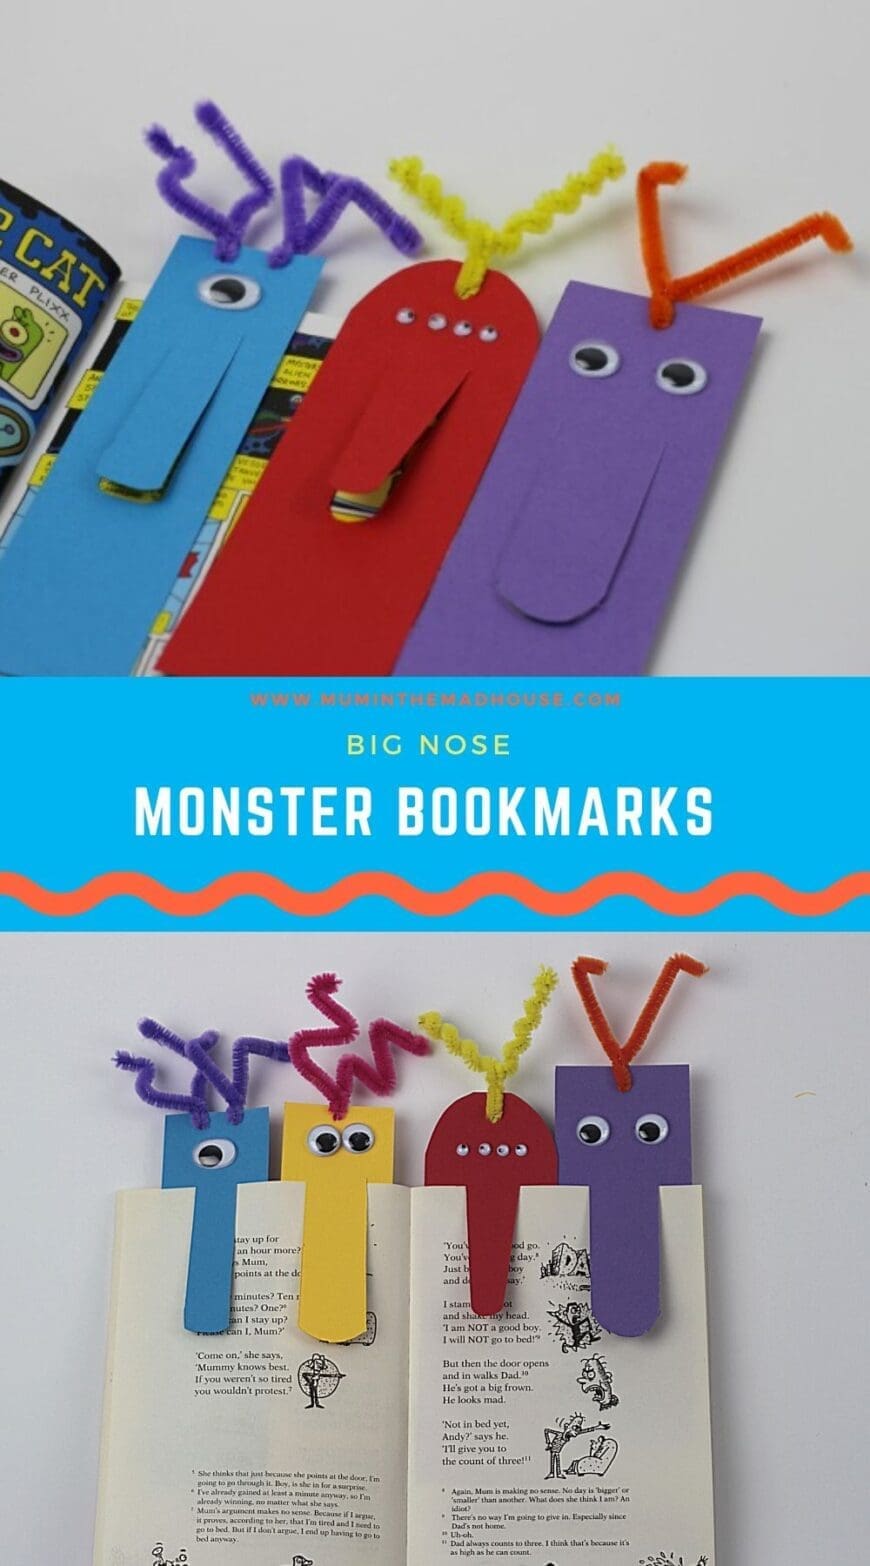 Books will be a whole lot more fun when your kids make their own cute Big Nose Monster Bookmarks